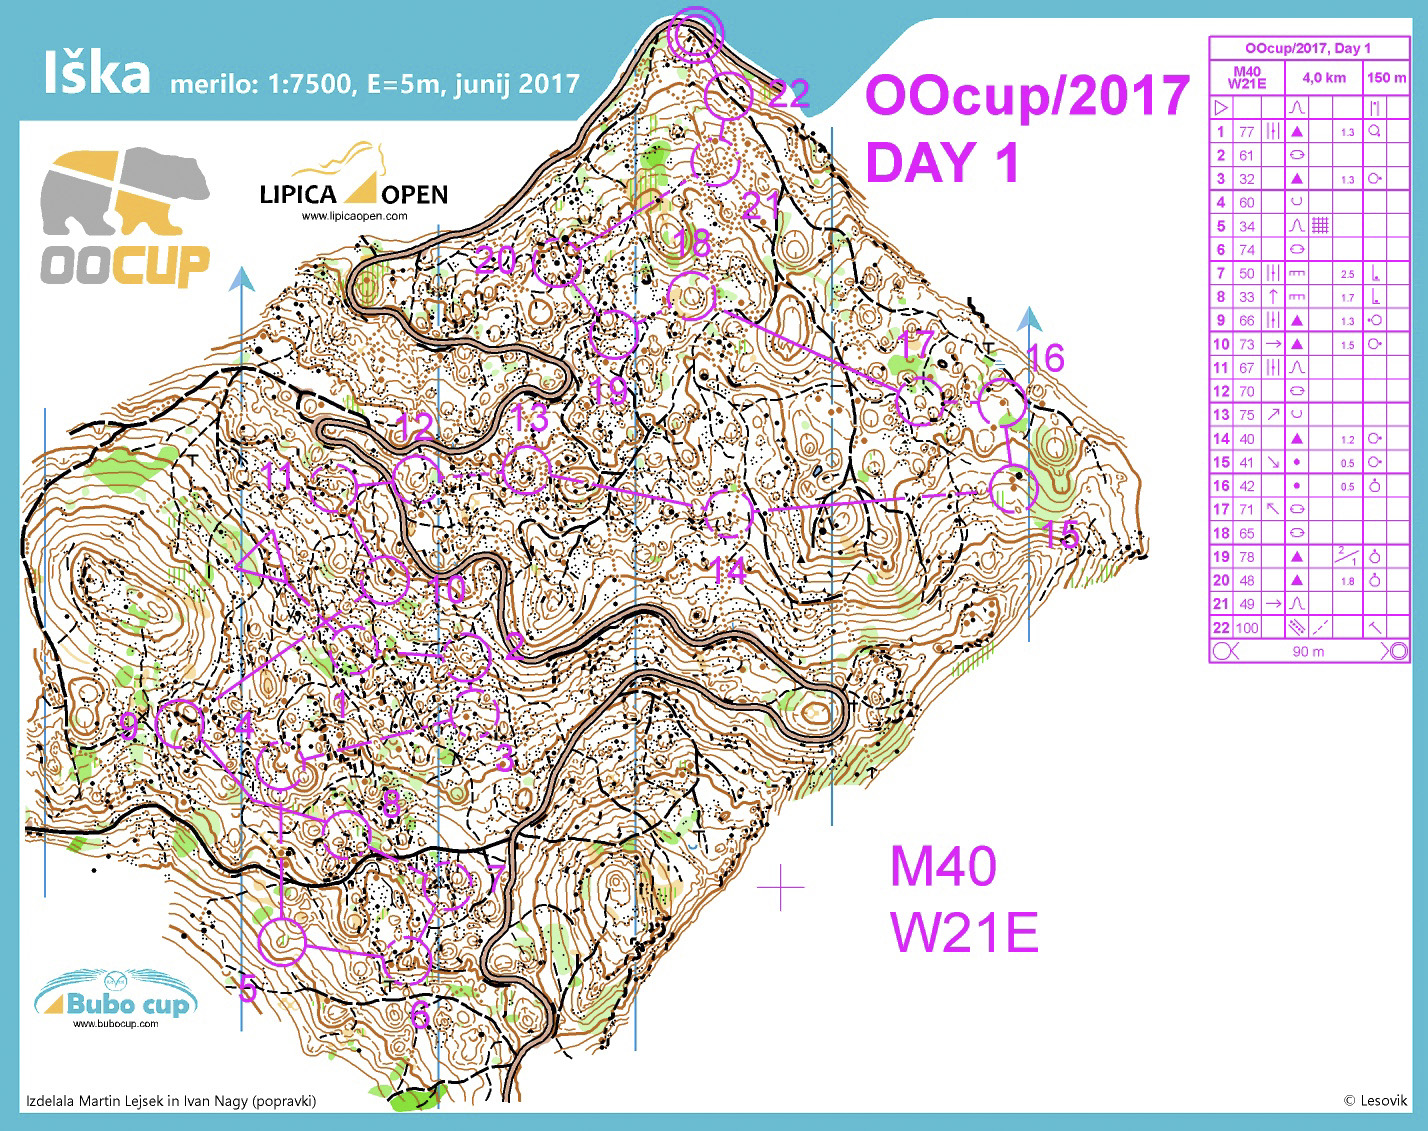 Oocup 2017 Day 1 (24-07-2017)